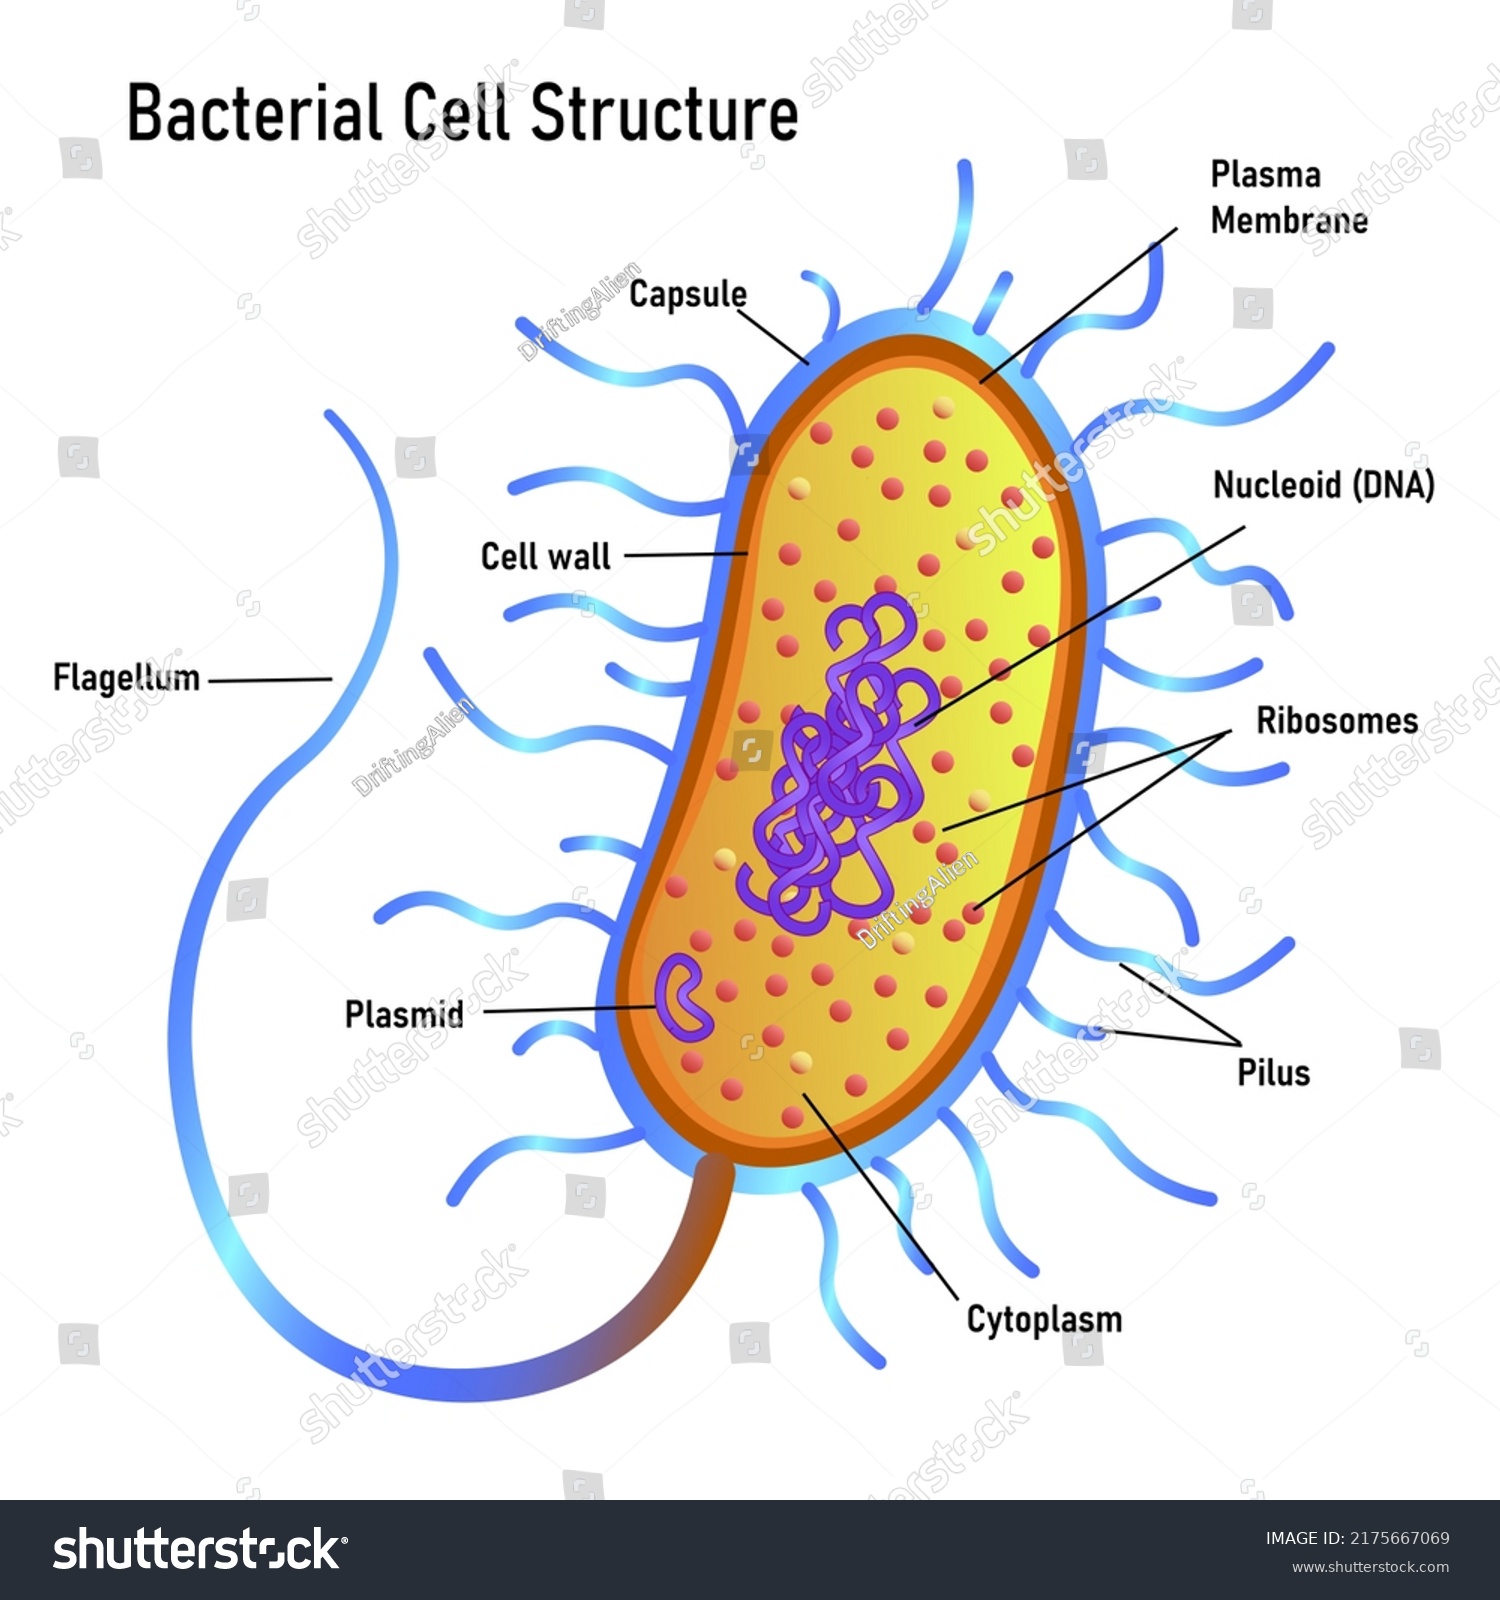 Bacterial Cell Anatomy Marking Structures On Stock Vector (Royalty Free ...